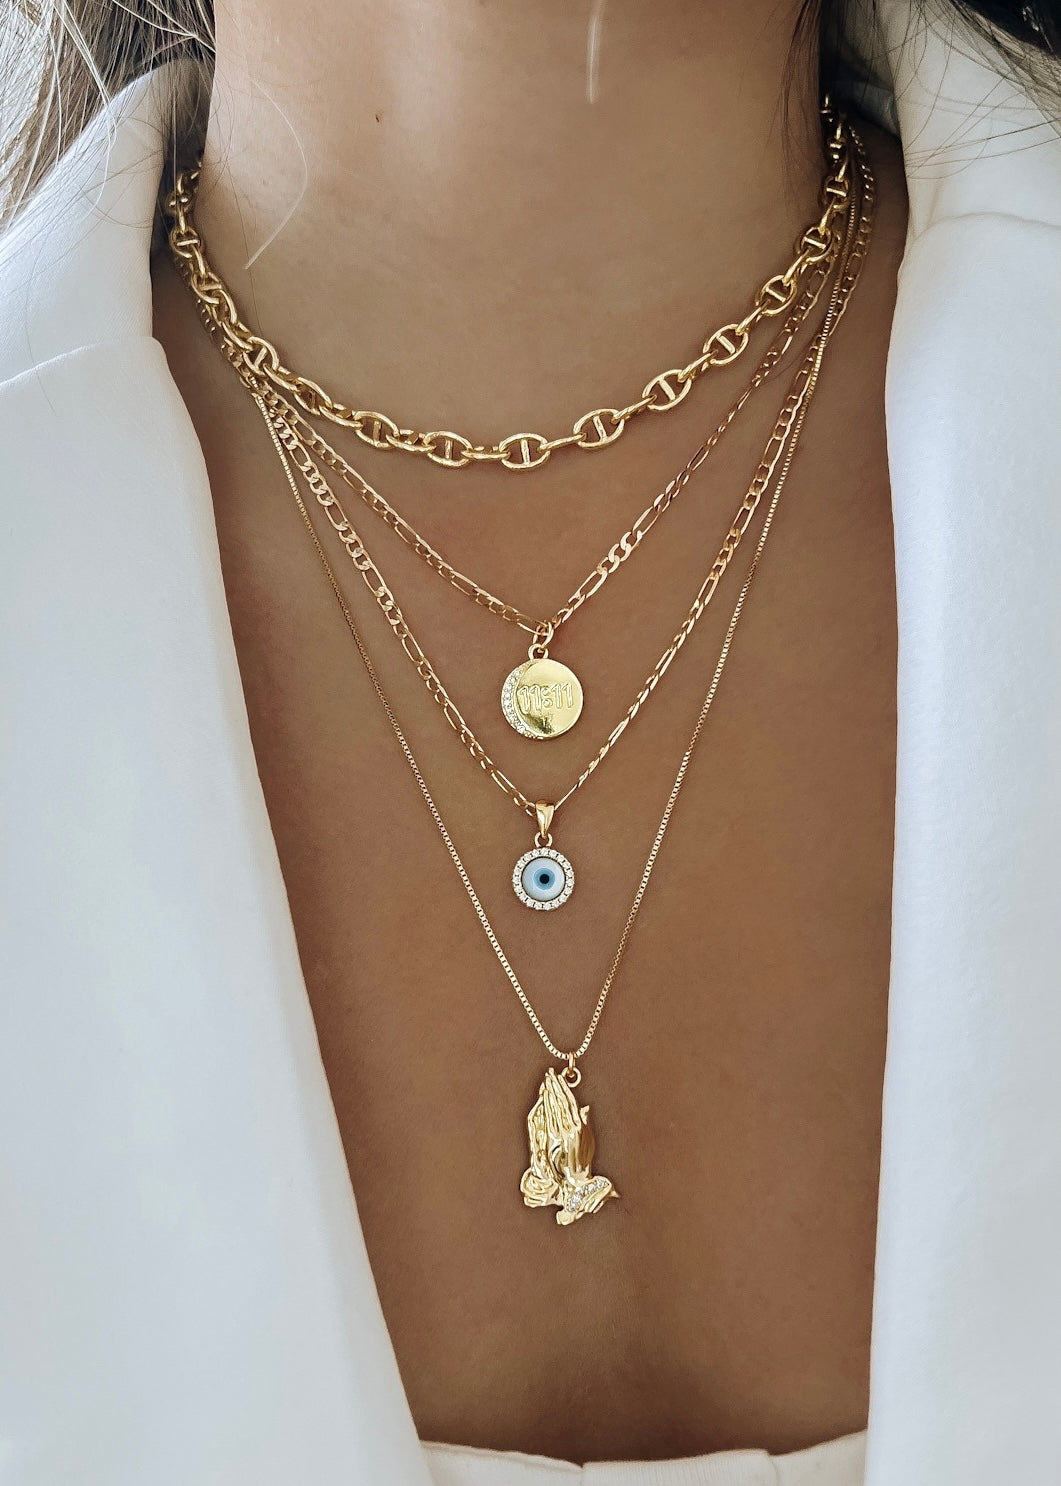 1111 Necklace - Gold Filled